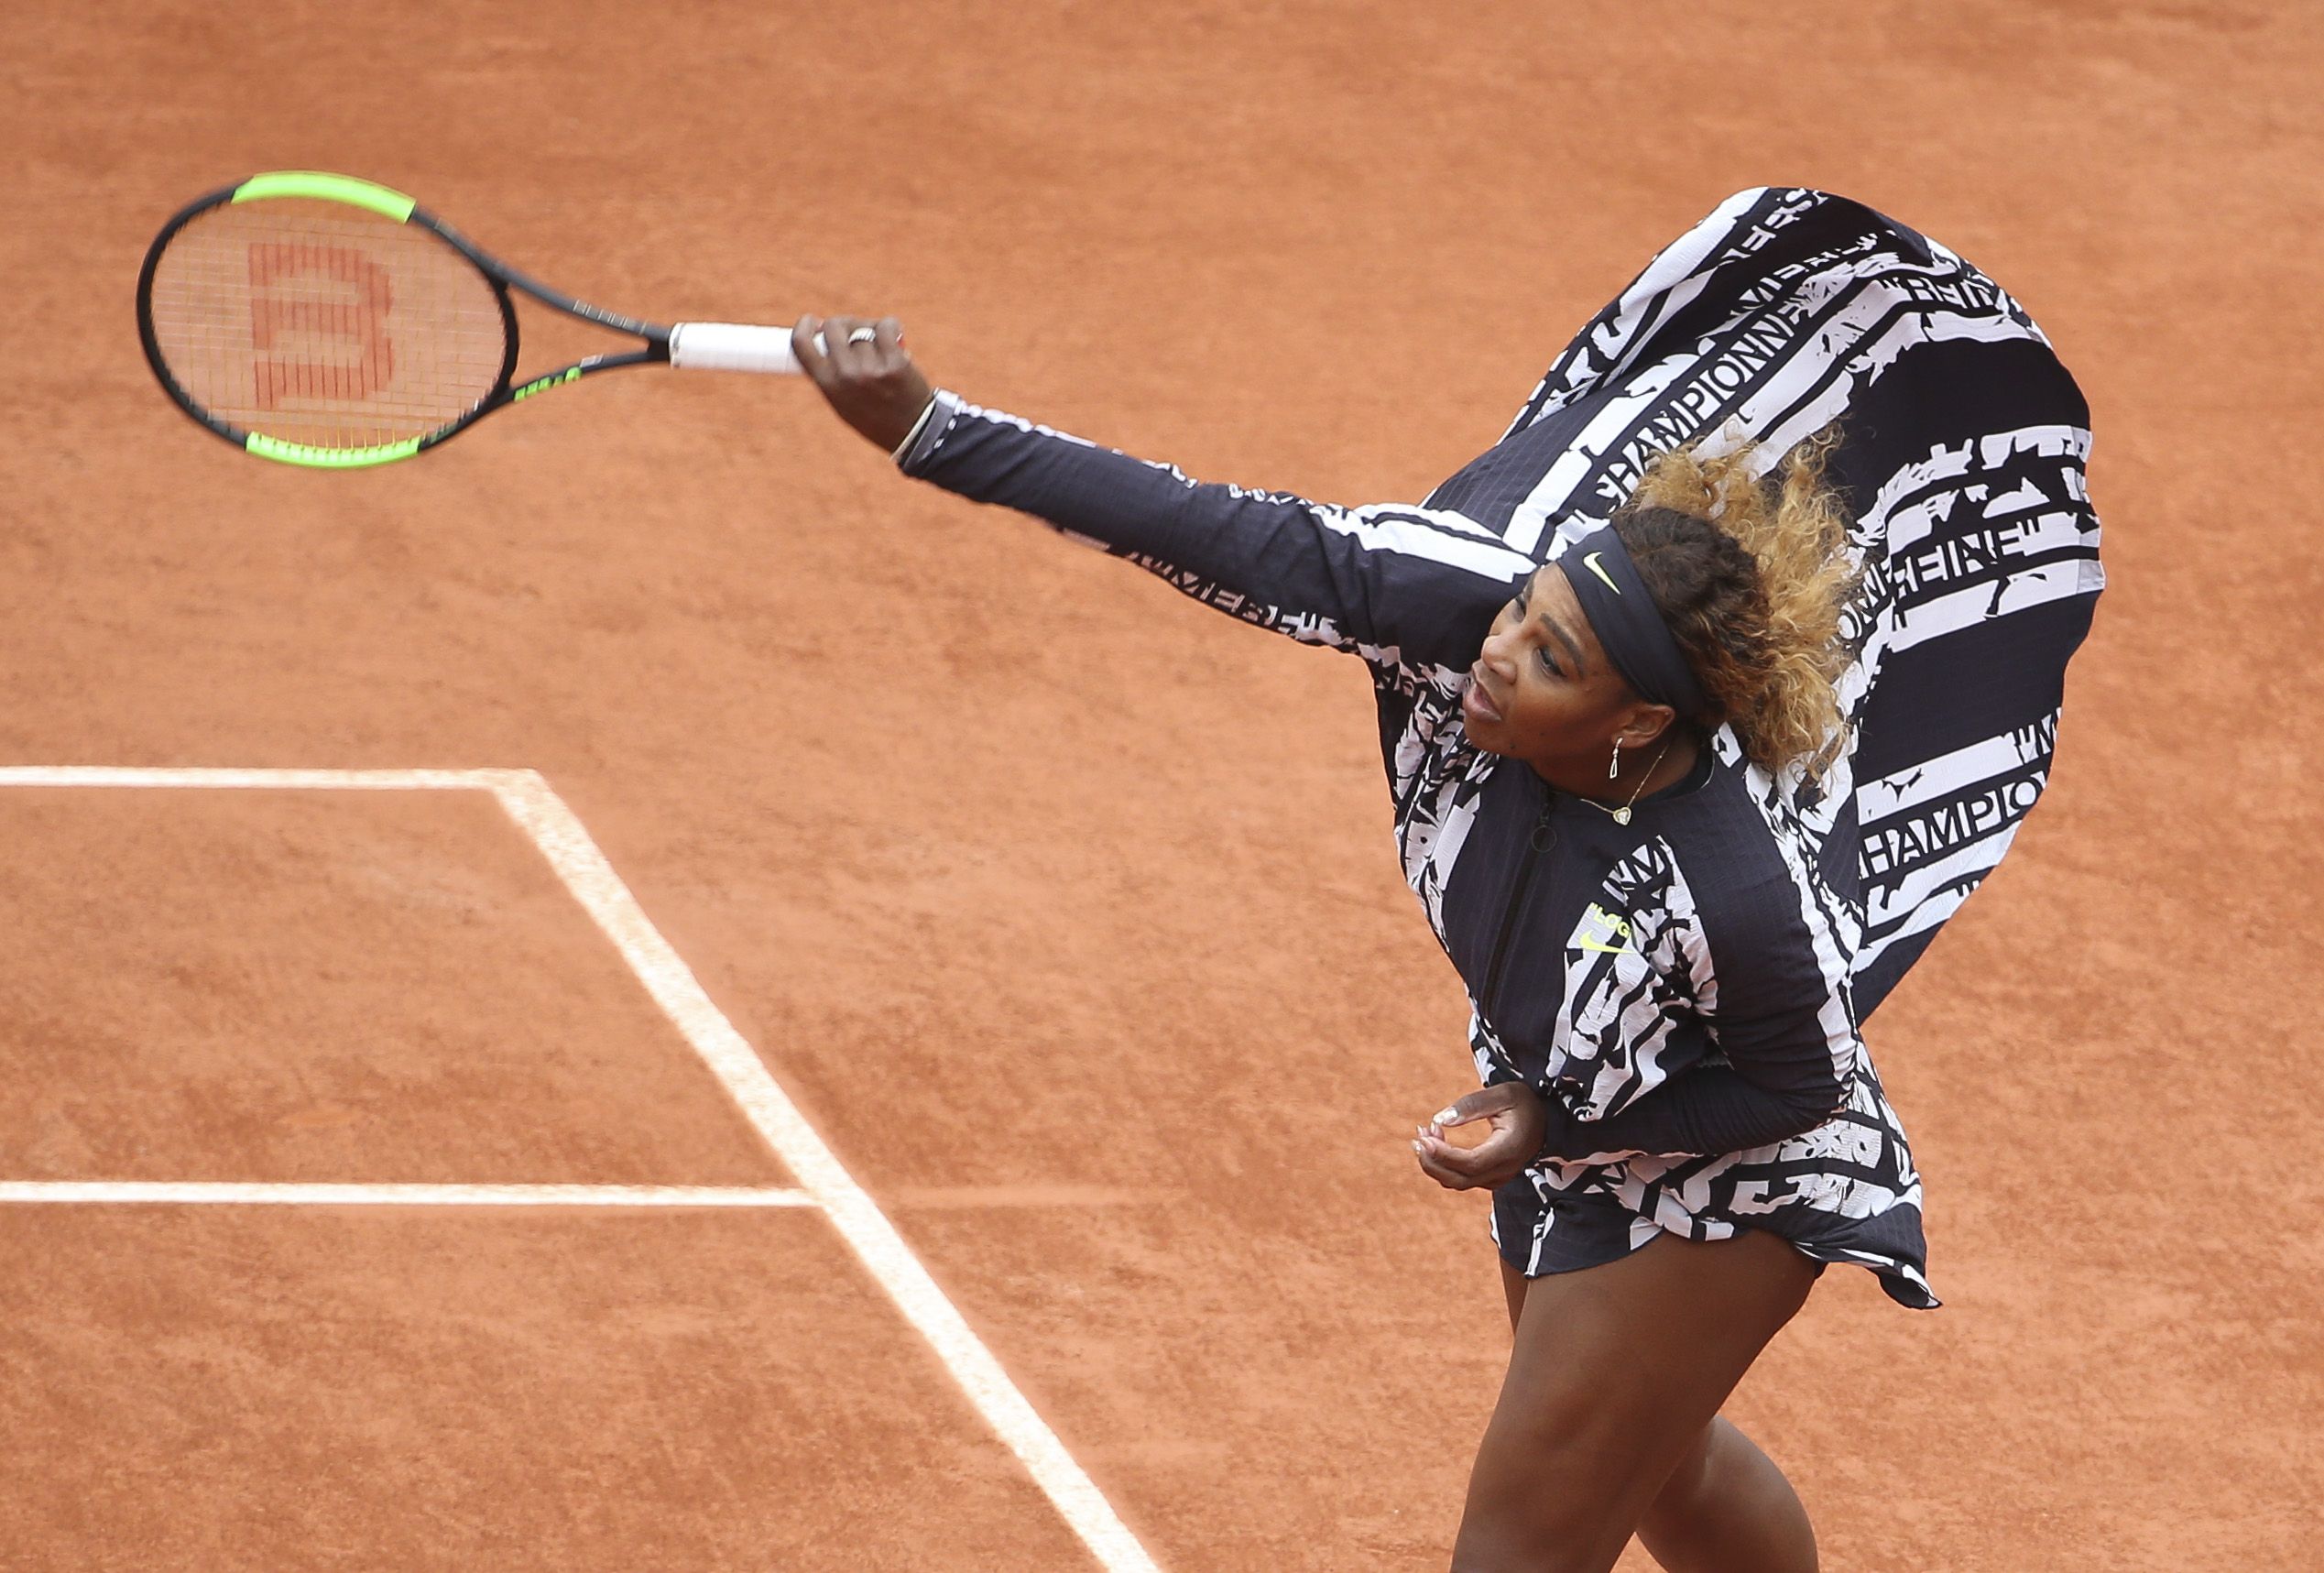 Serena Williams Wins First Round of French Open in Cape Outfit Designed by Virgil  Abloh – Fashion Bomb Daily